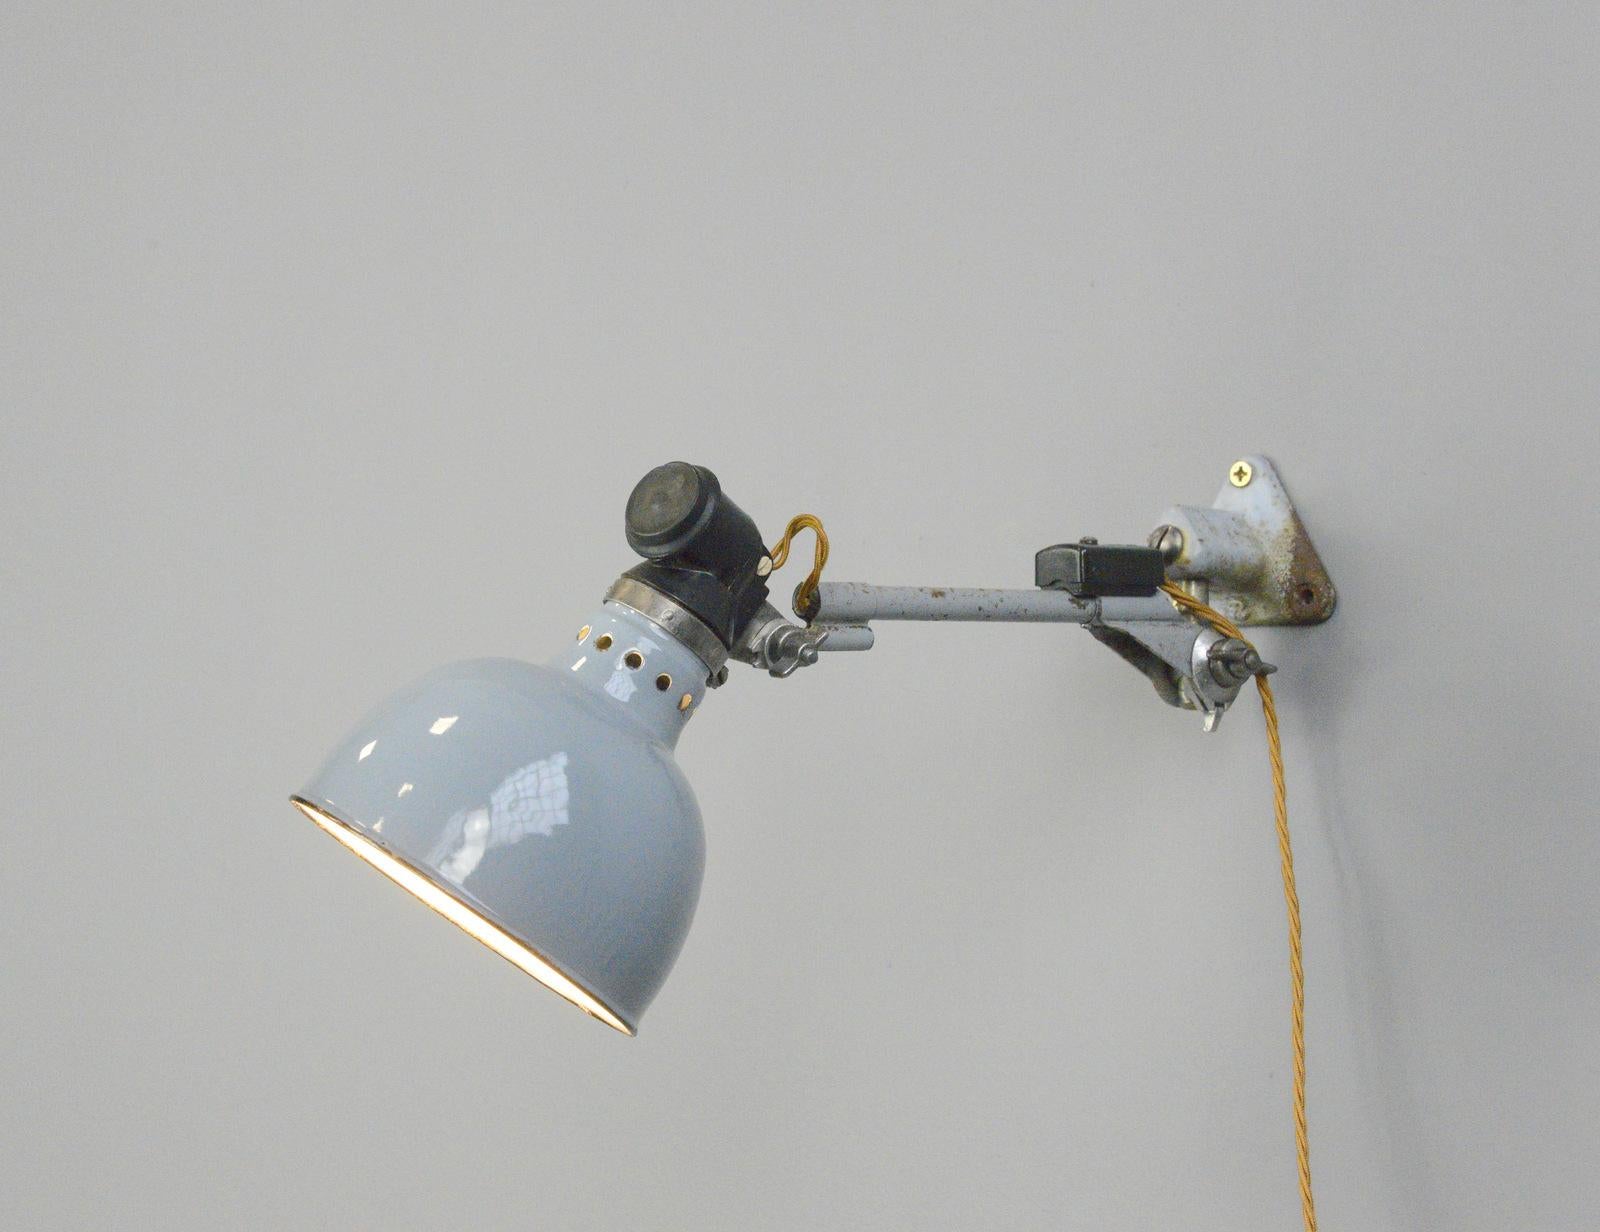 Large wall mounted task lamp by Rademacher Circa 1930s

- Vitreous grey enamel shade
- Bakelite switch
- Takes E27 fitting bulbs
- Tubular steel articulated arms
- By Ernst Rademacher
- German ~ 1930s
- Shade measures 16cm wide 
- Extends